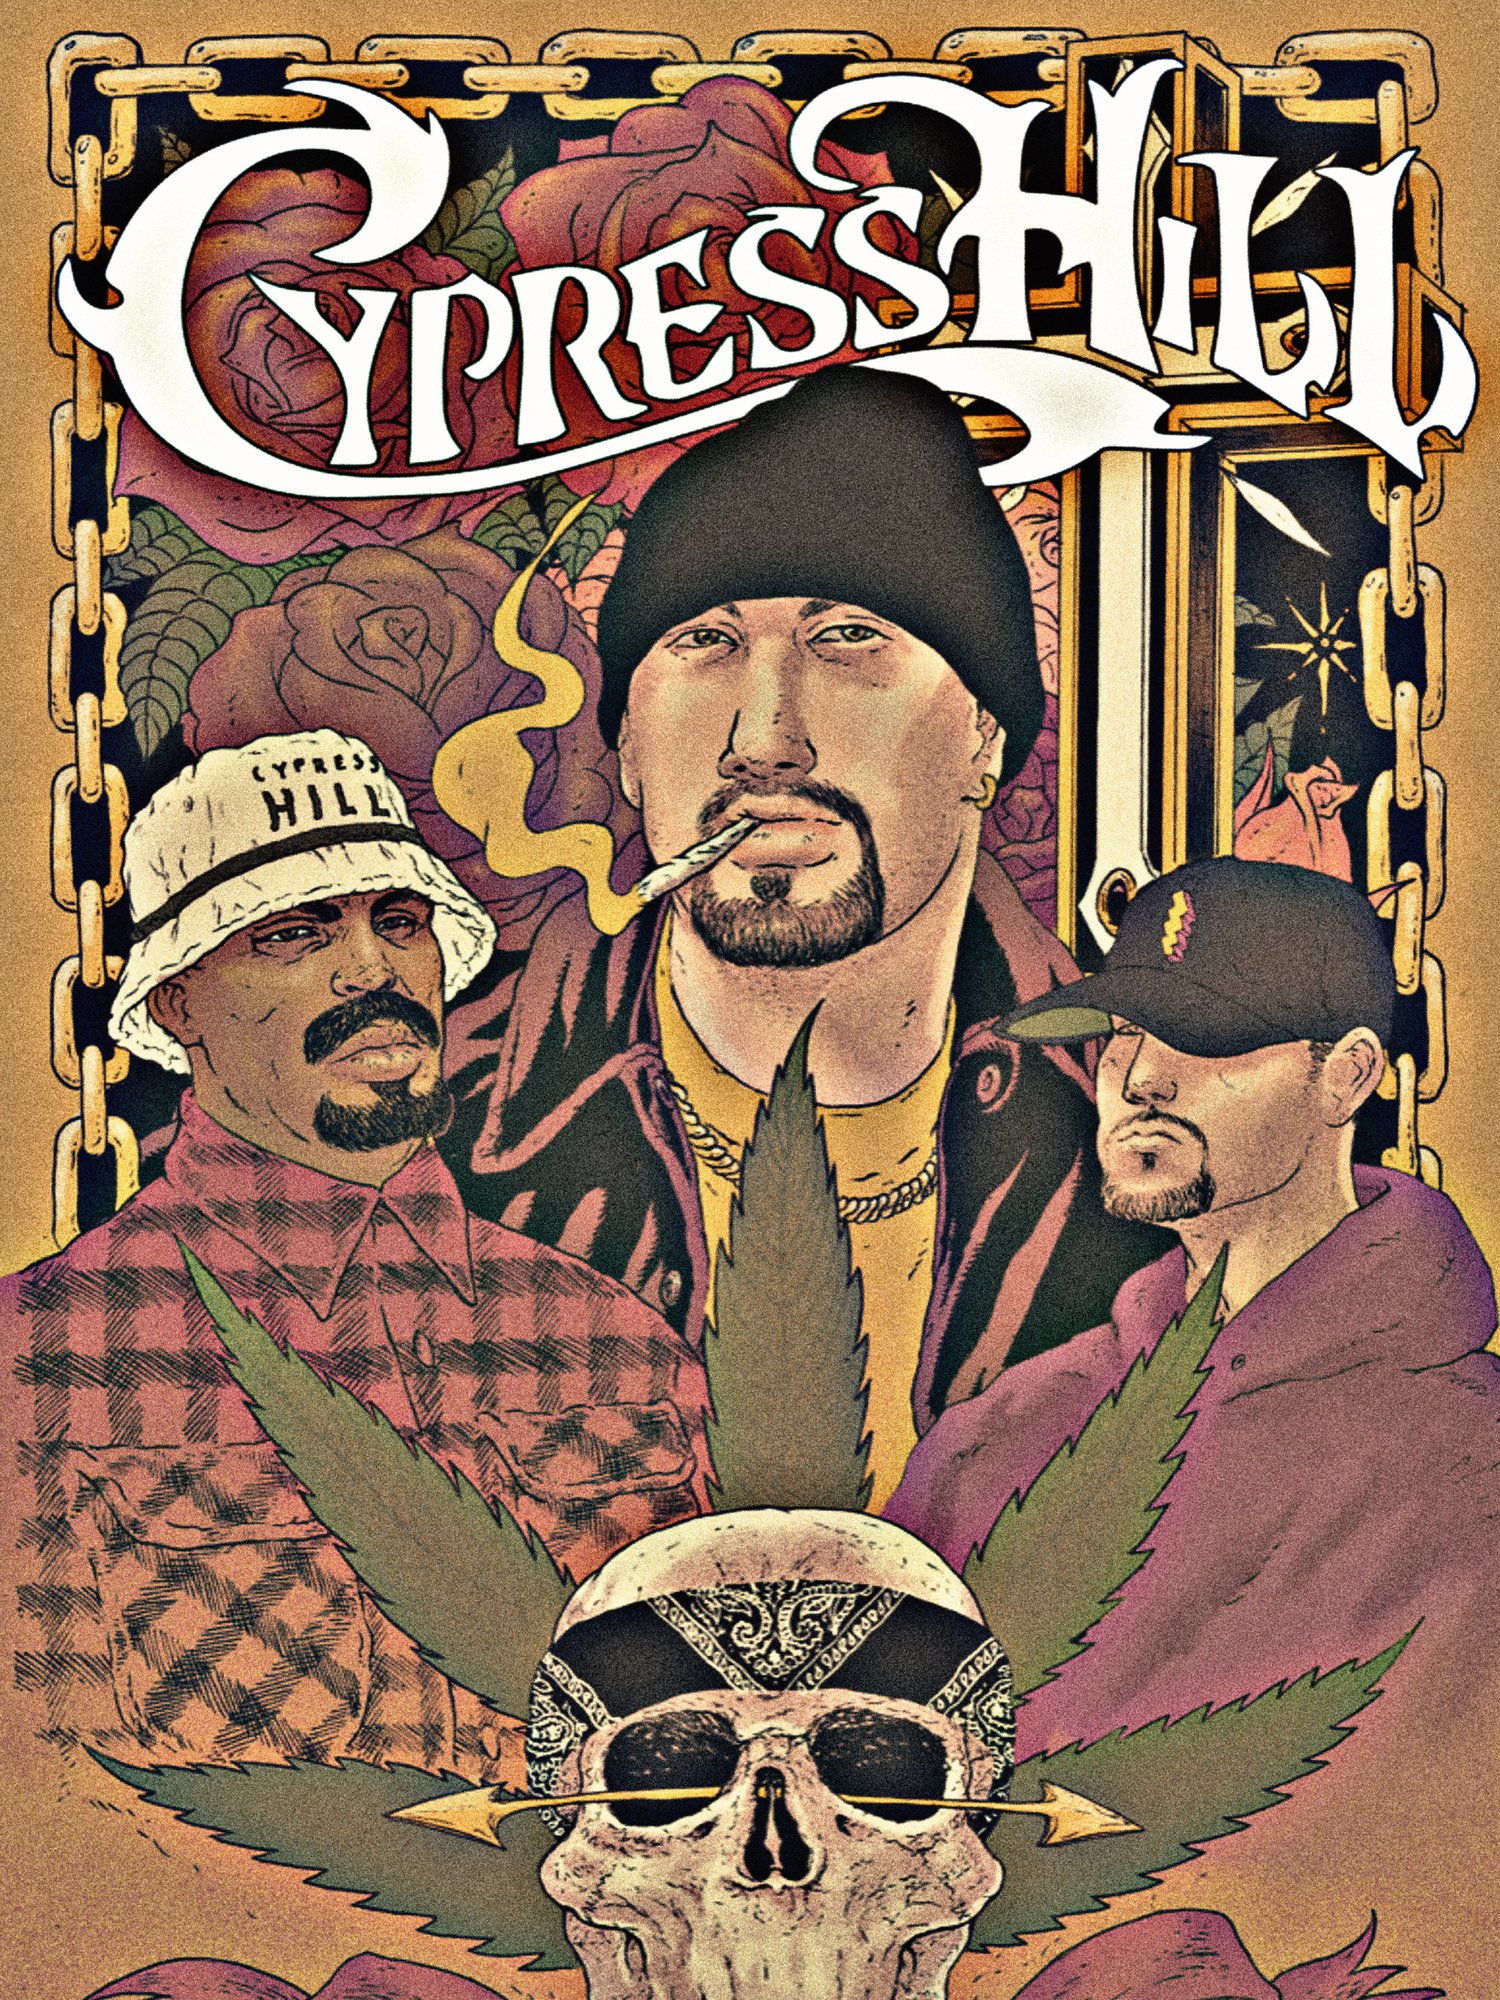 Image of Cypress Hill (18x24 Poster)